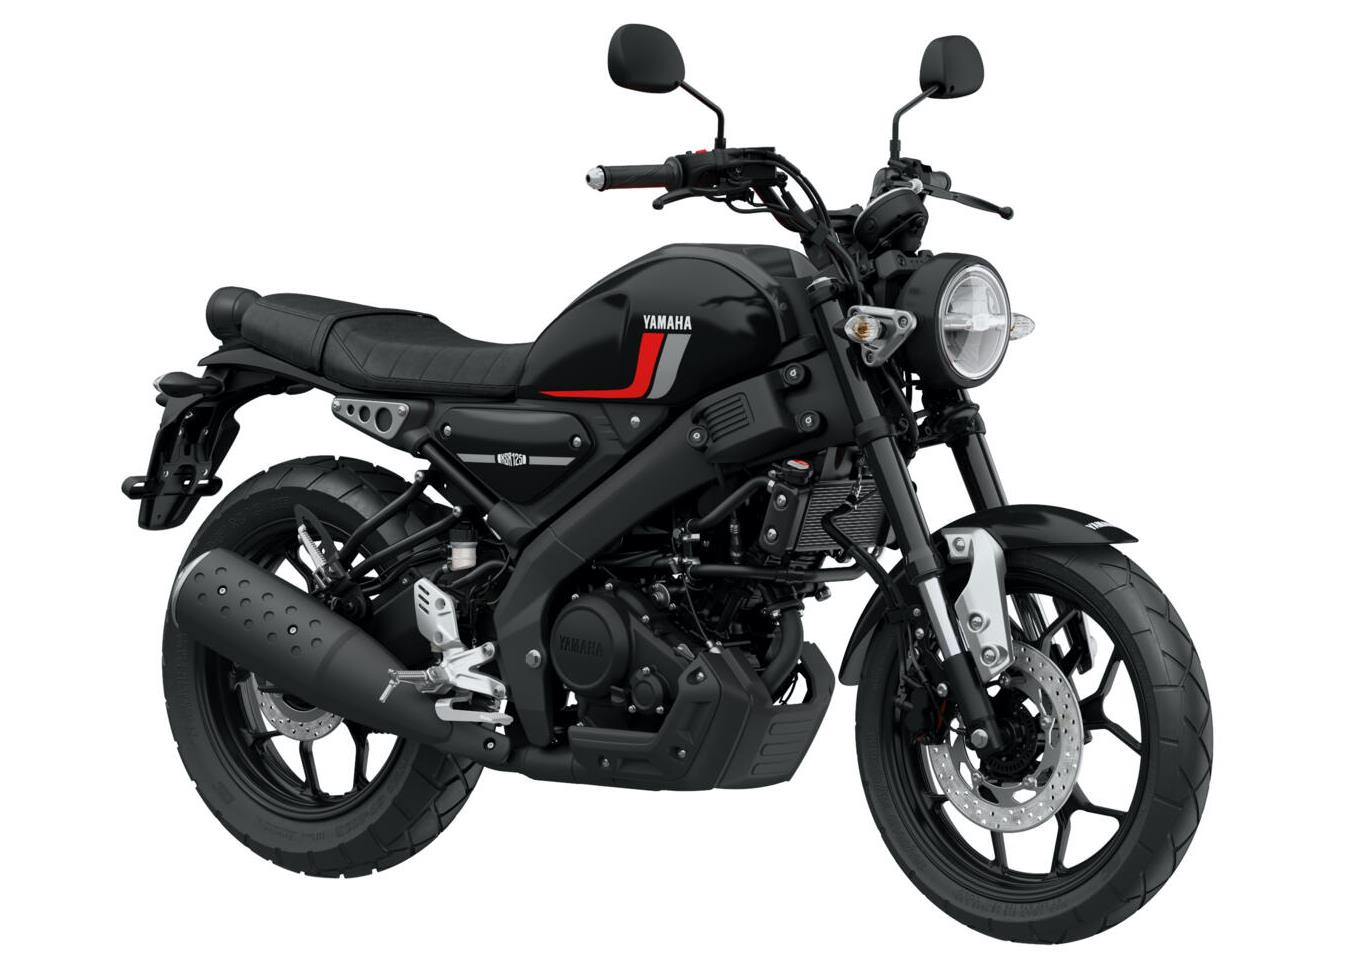 2022 Yamaha XSR125 Specifications and Expected Price in India